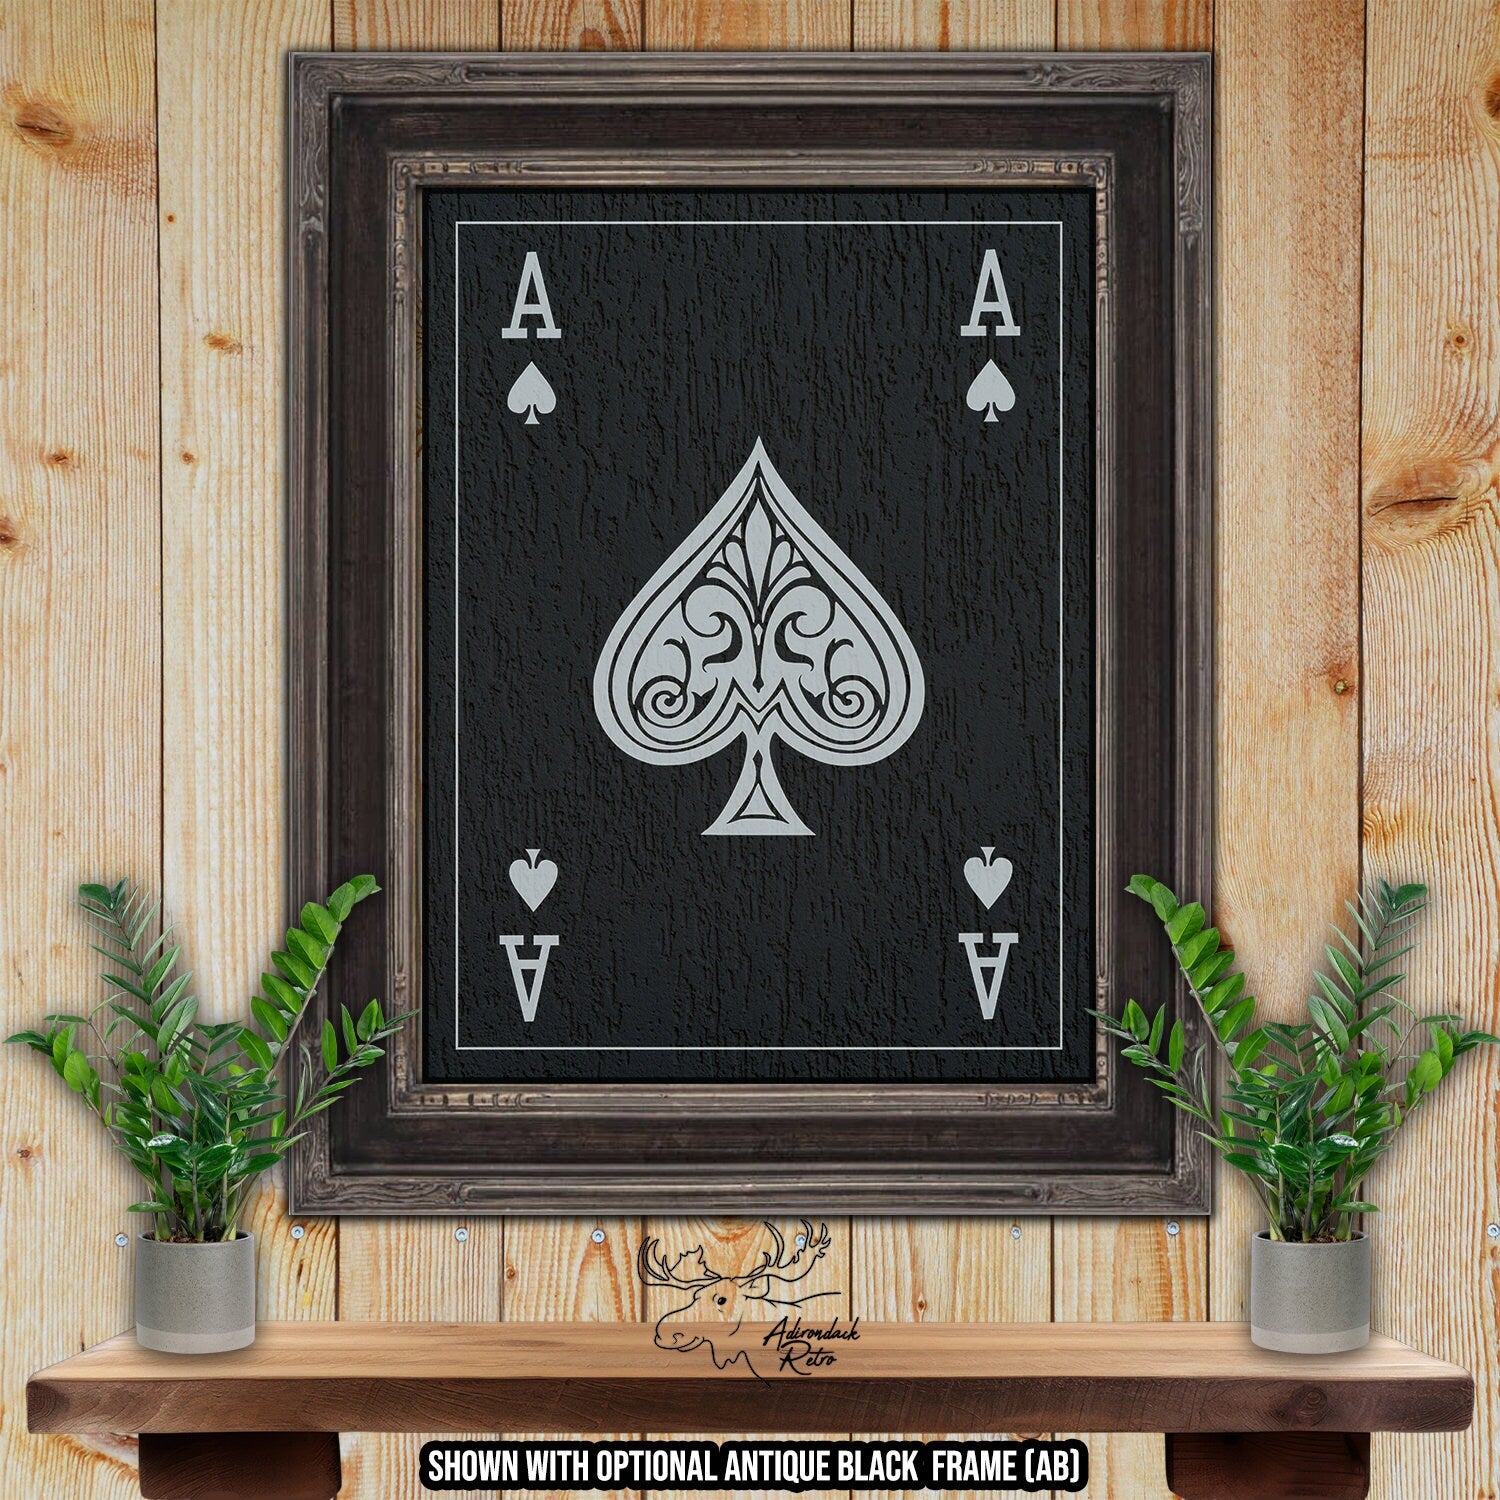 Ace of Spades Playing Card Fine Art Print - Black and Silver Death Card Poster Art at Adirondack Retro